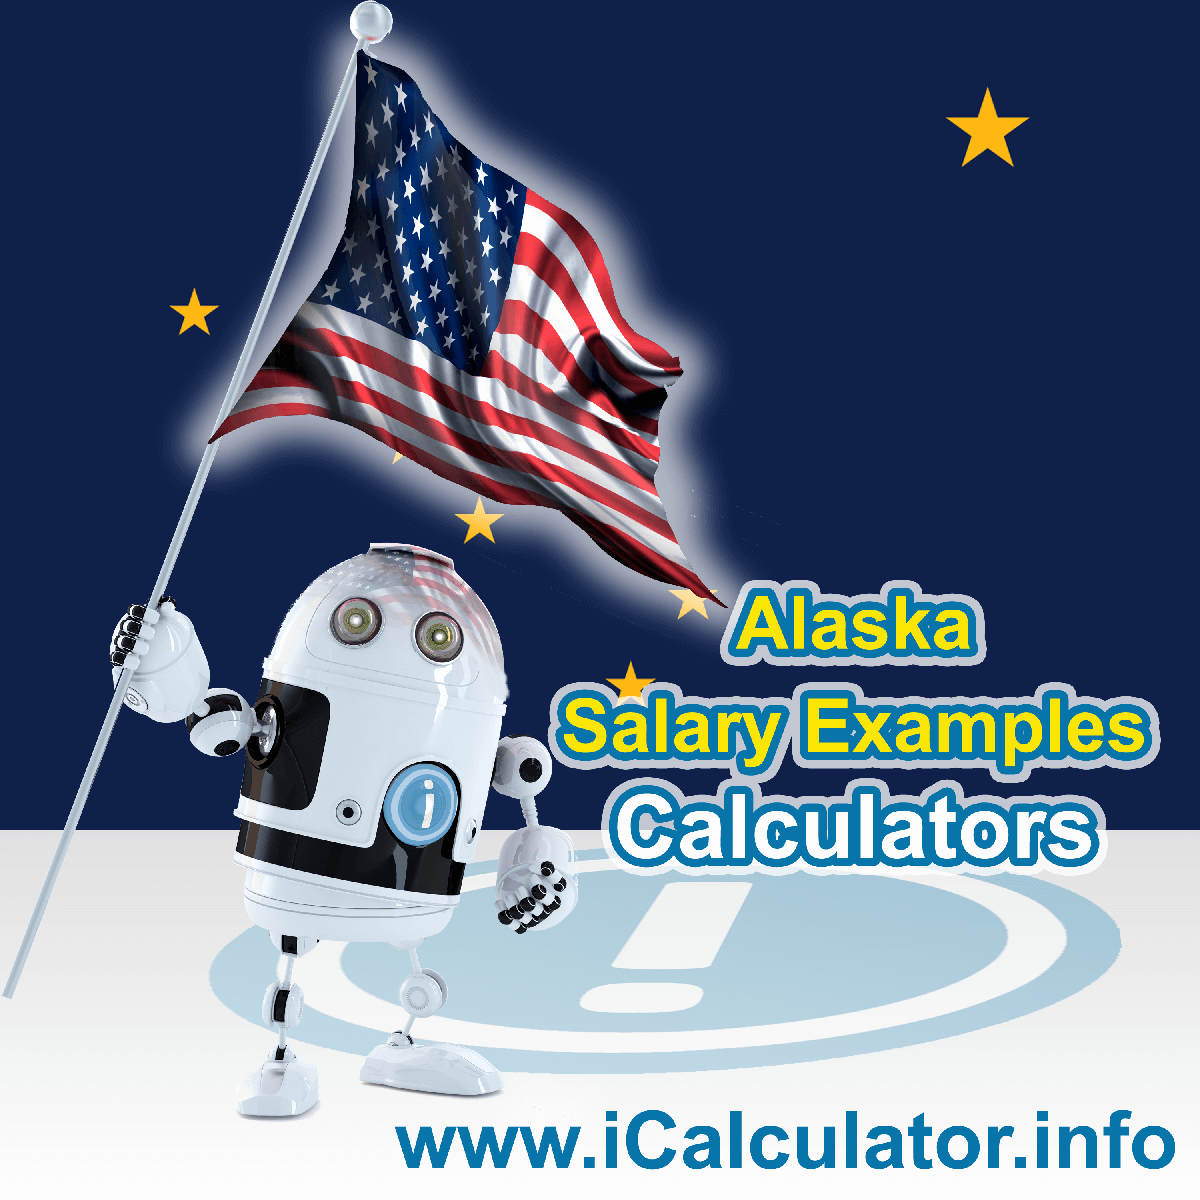 Alaska Salary Example for $ 70,000.00 in 2023 | iCalculator™ | $ 70,000.00 salary example for employee and employer paying Alaska State tincome taxes. Detailed salary after tax calculation including Alaska State Tax, Federal State Tax, Medicare Deductions, Social Security, Capital Gains and other income tax and salary deductions complete with supporting Alaska state tax tables 